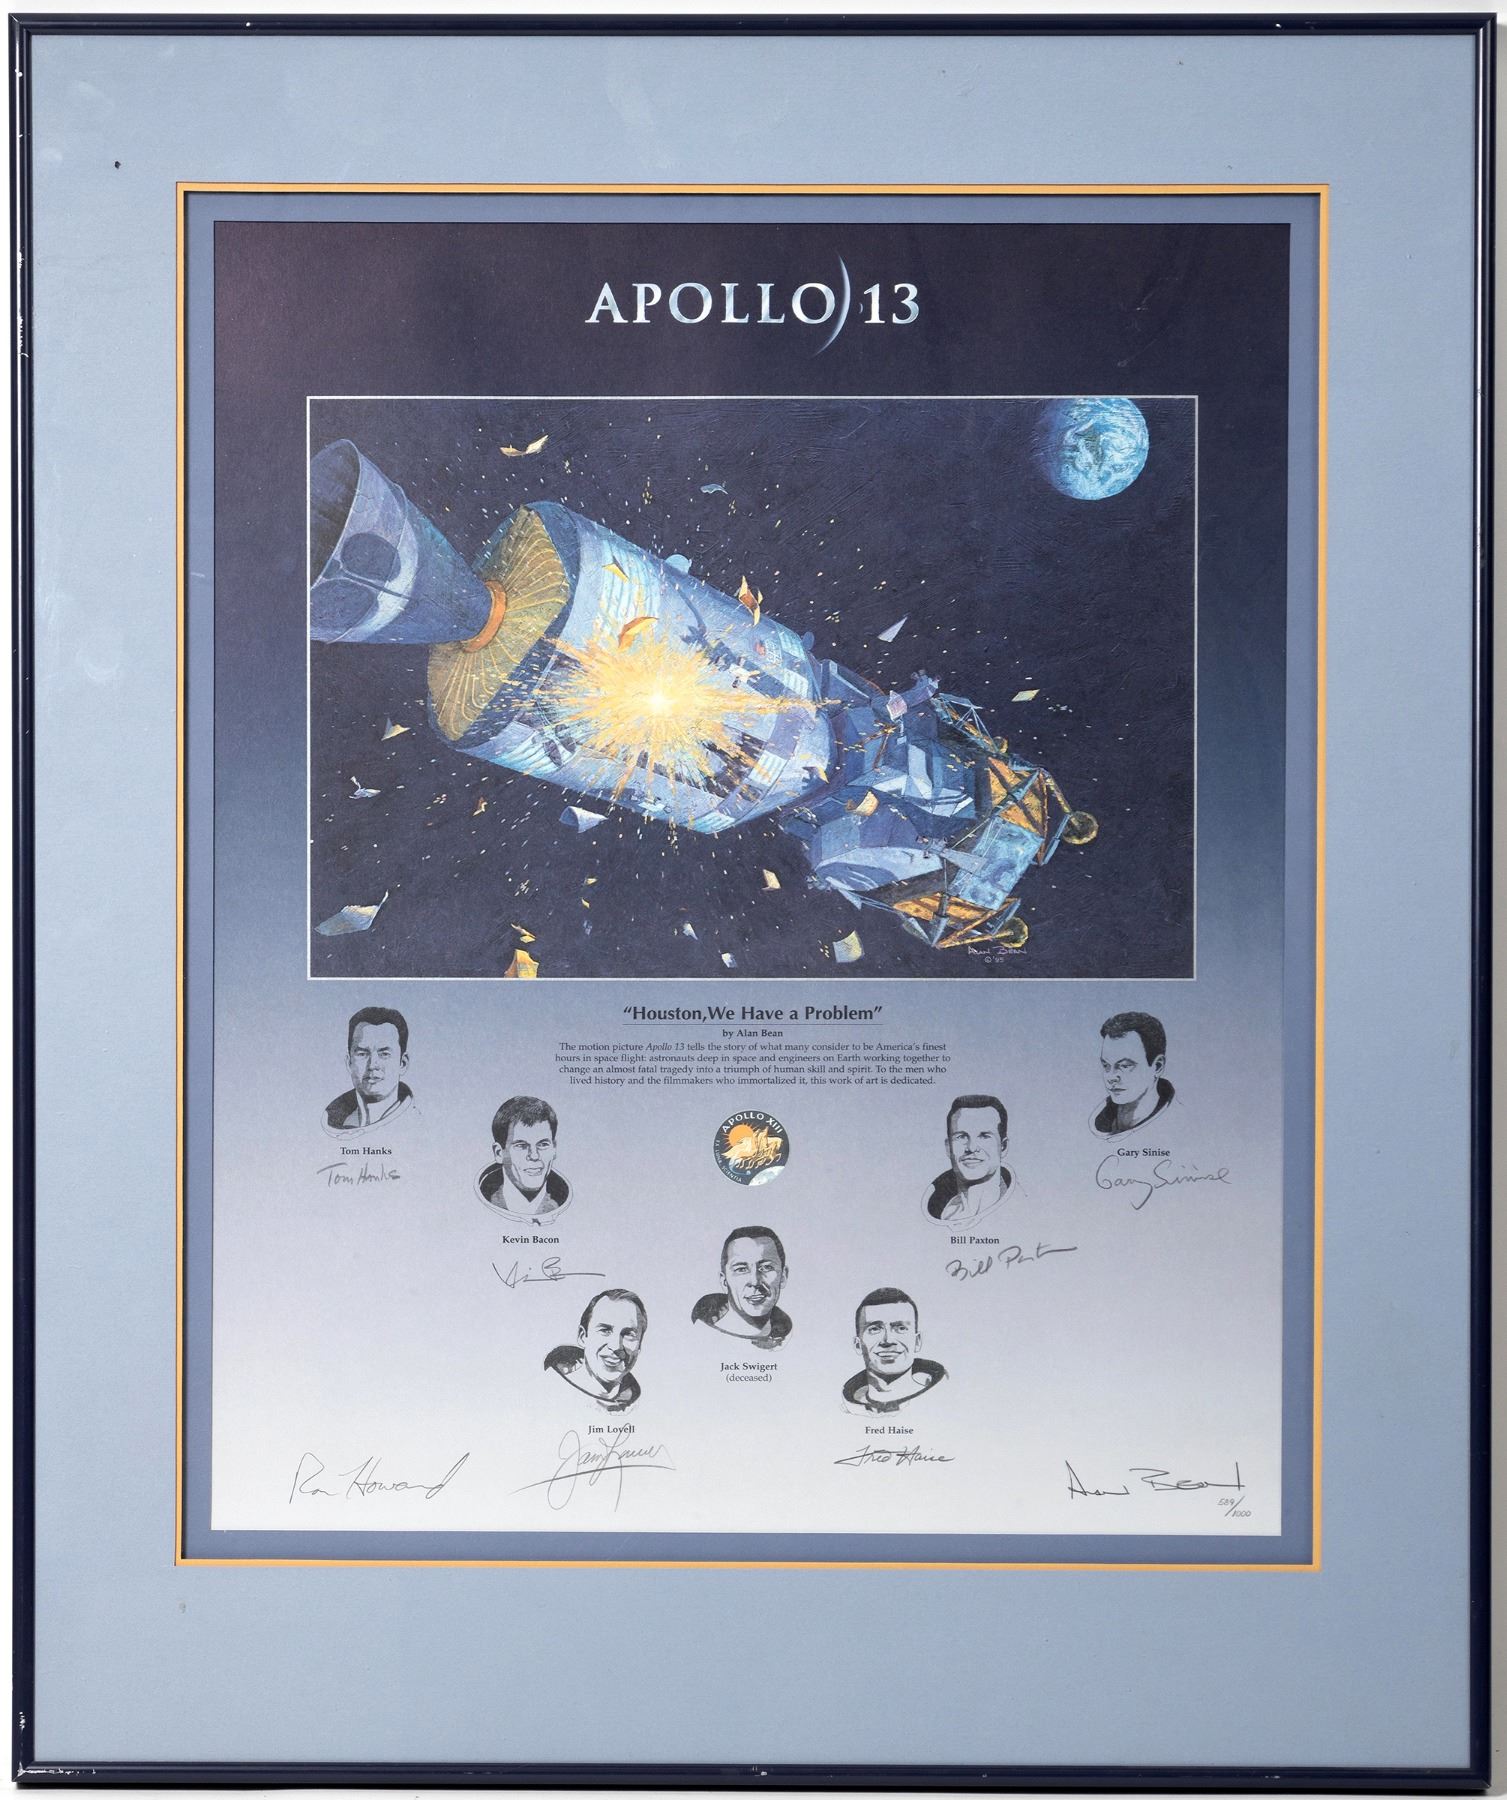 Alan Bean print, ‘Houston, We Have a Problem,’ signed by Bean, other astronauts and ‘Apollo 13’ actors, est. $3,000-$4,000